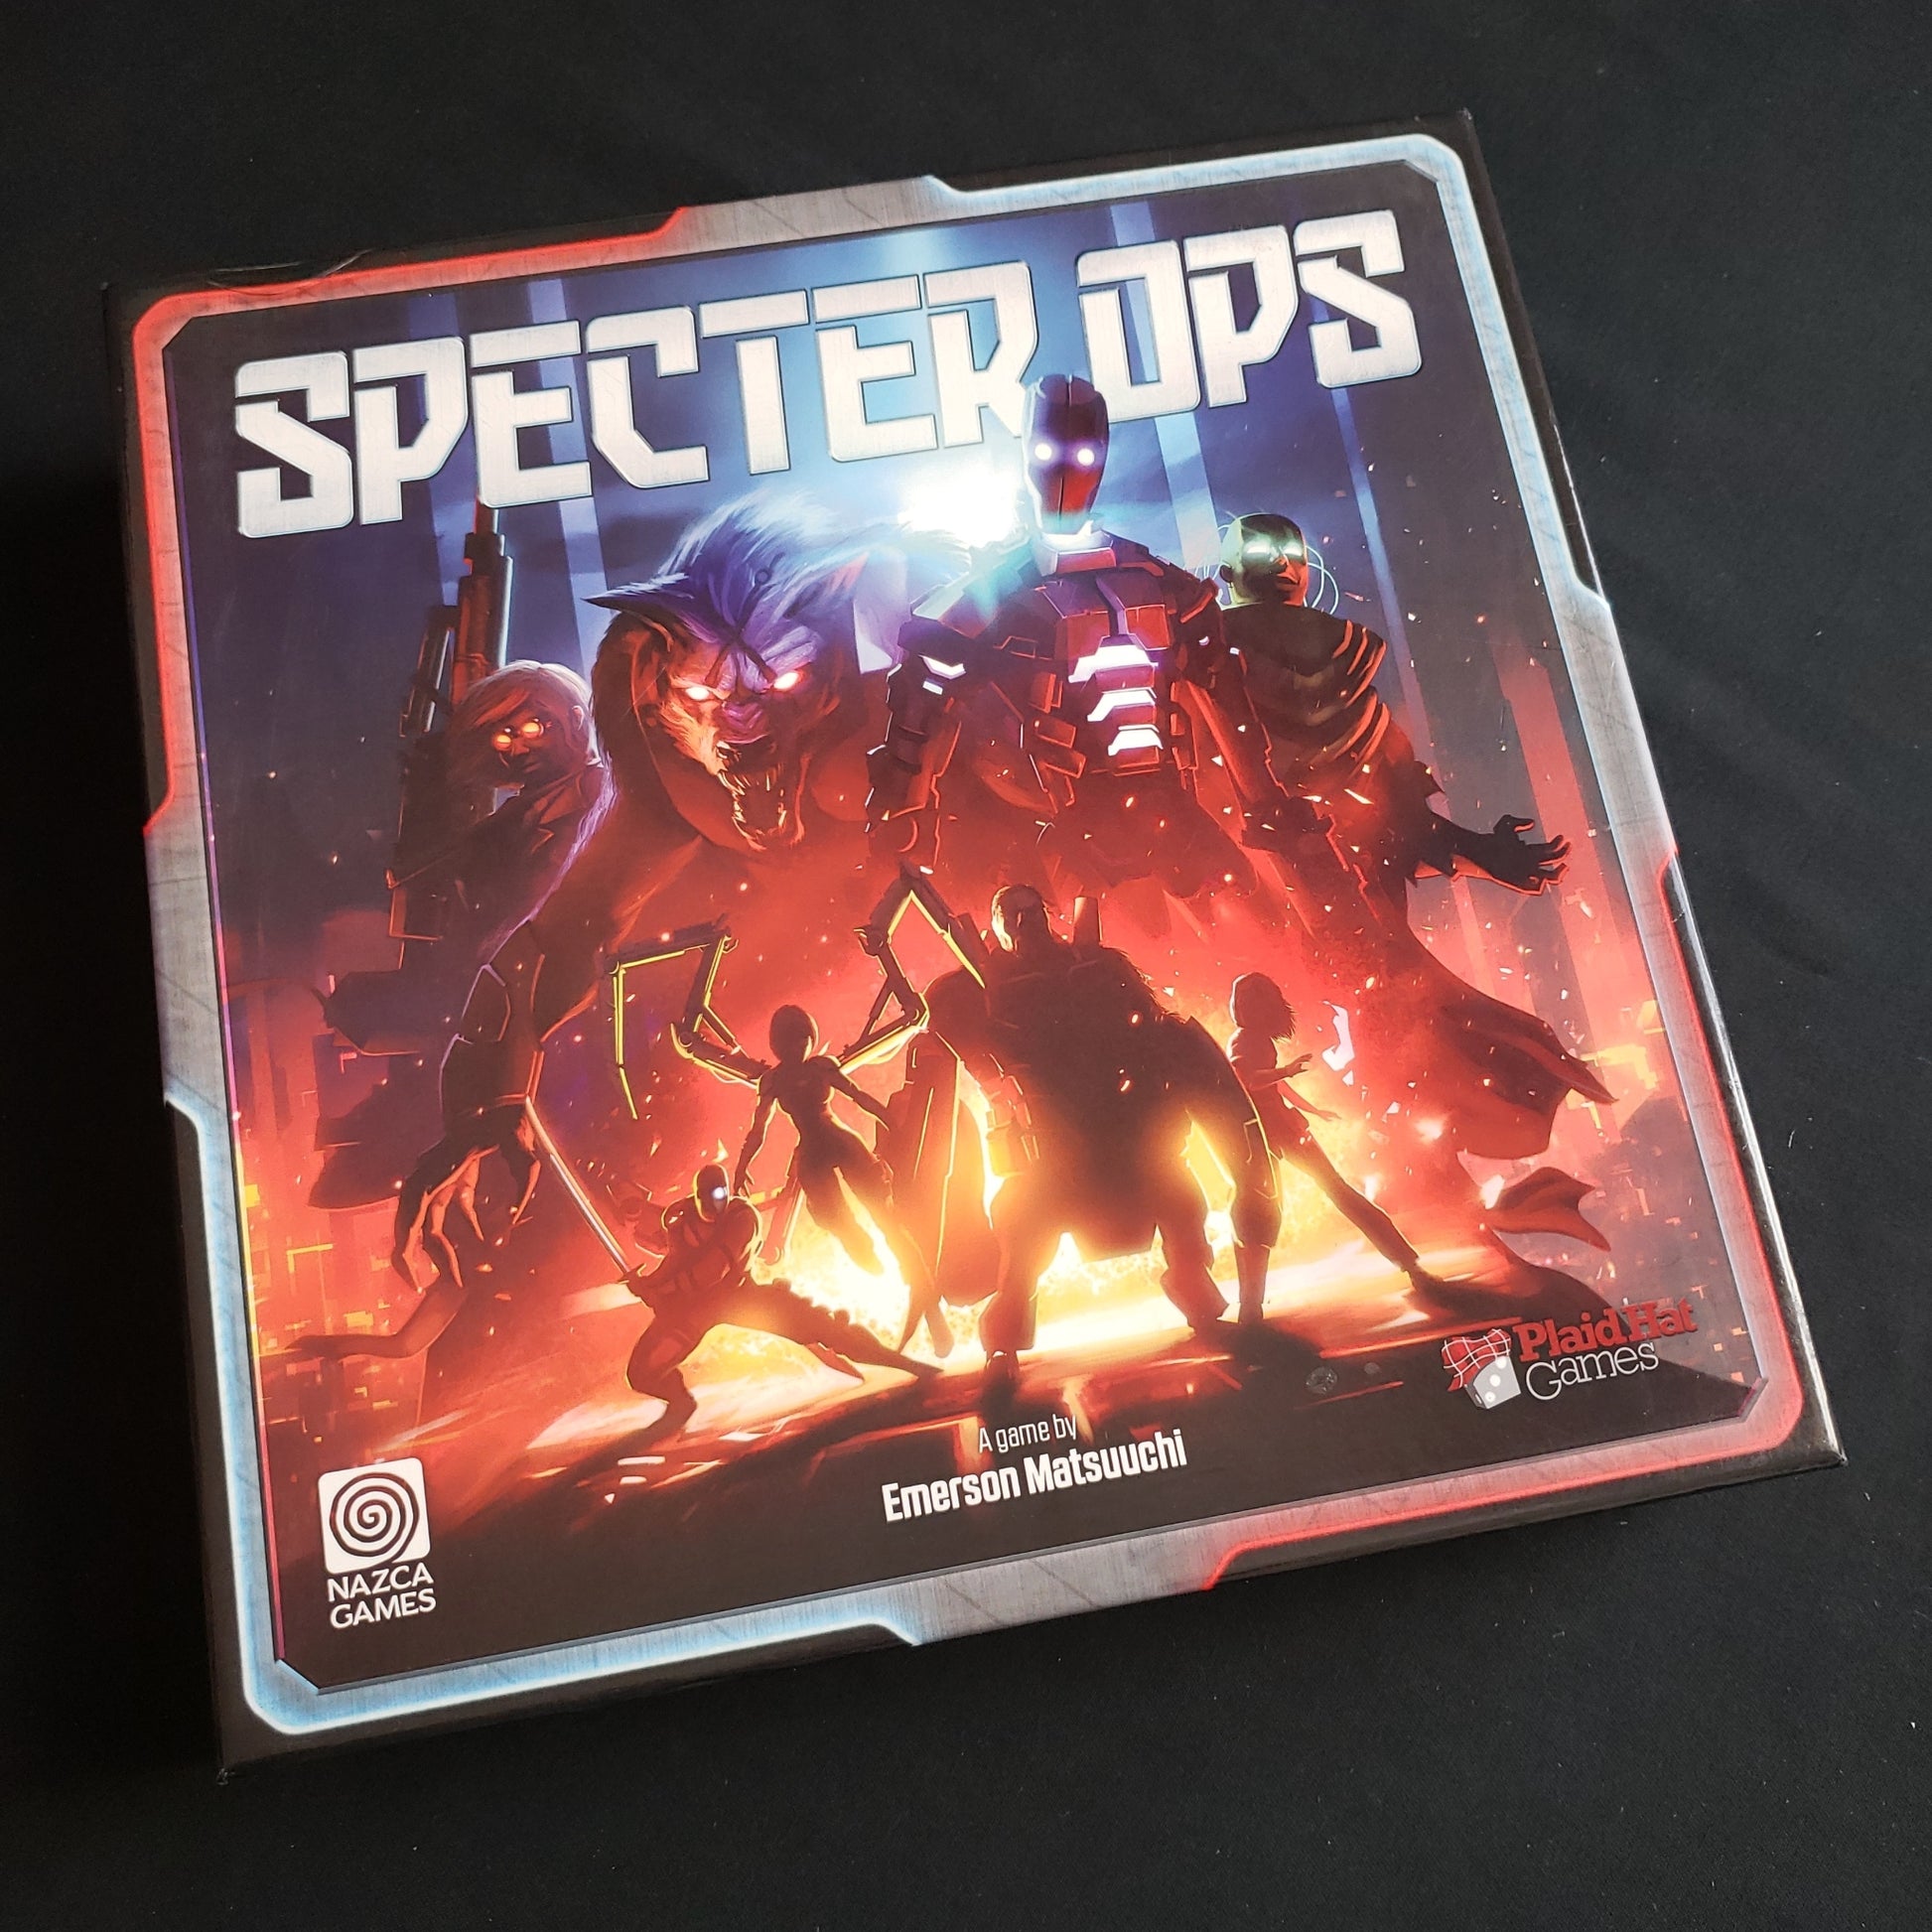 Image shows the front cover of the box of the Specter Ops board game